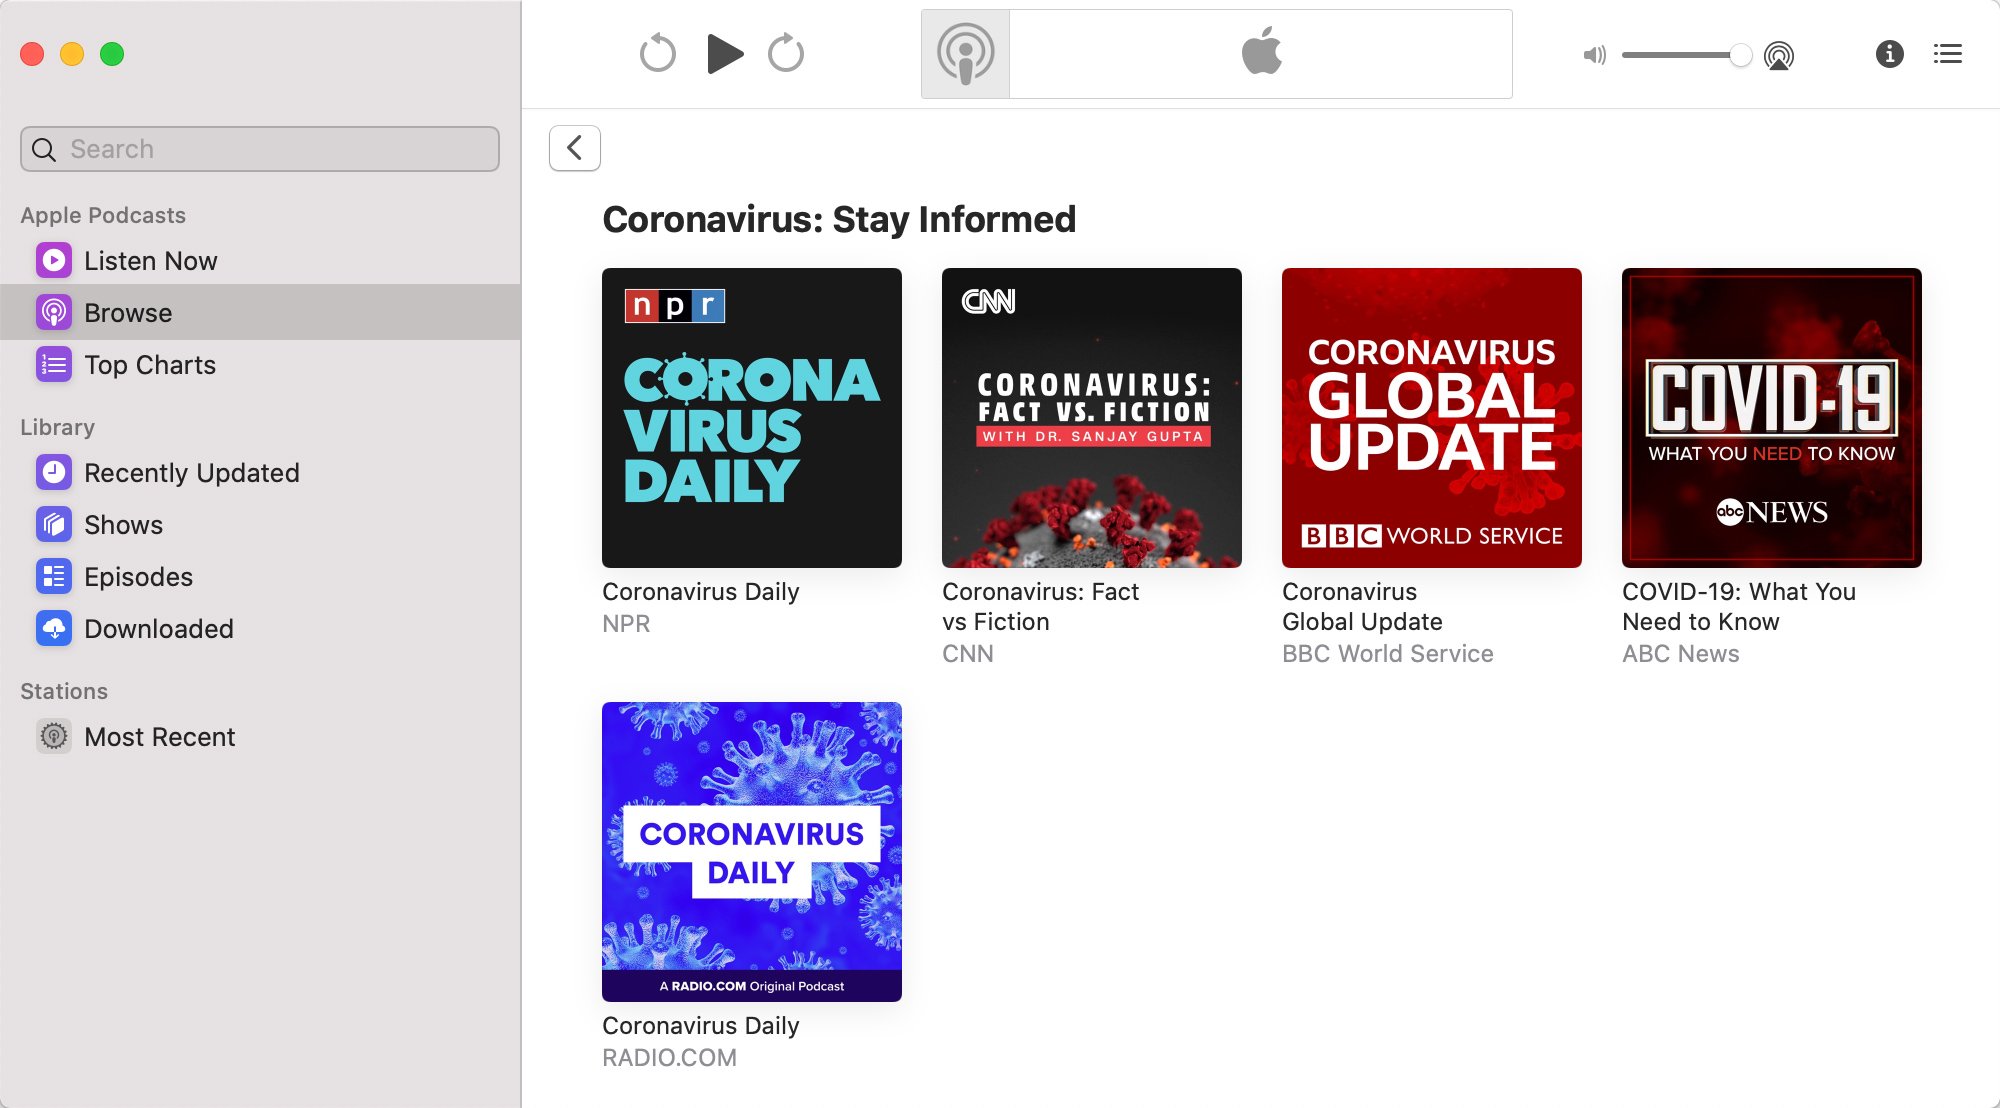 Apple's Podcasts App Features Coronavirus and Stay-at-Home Content